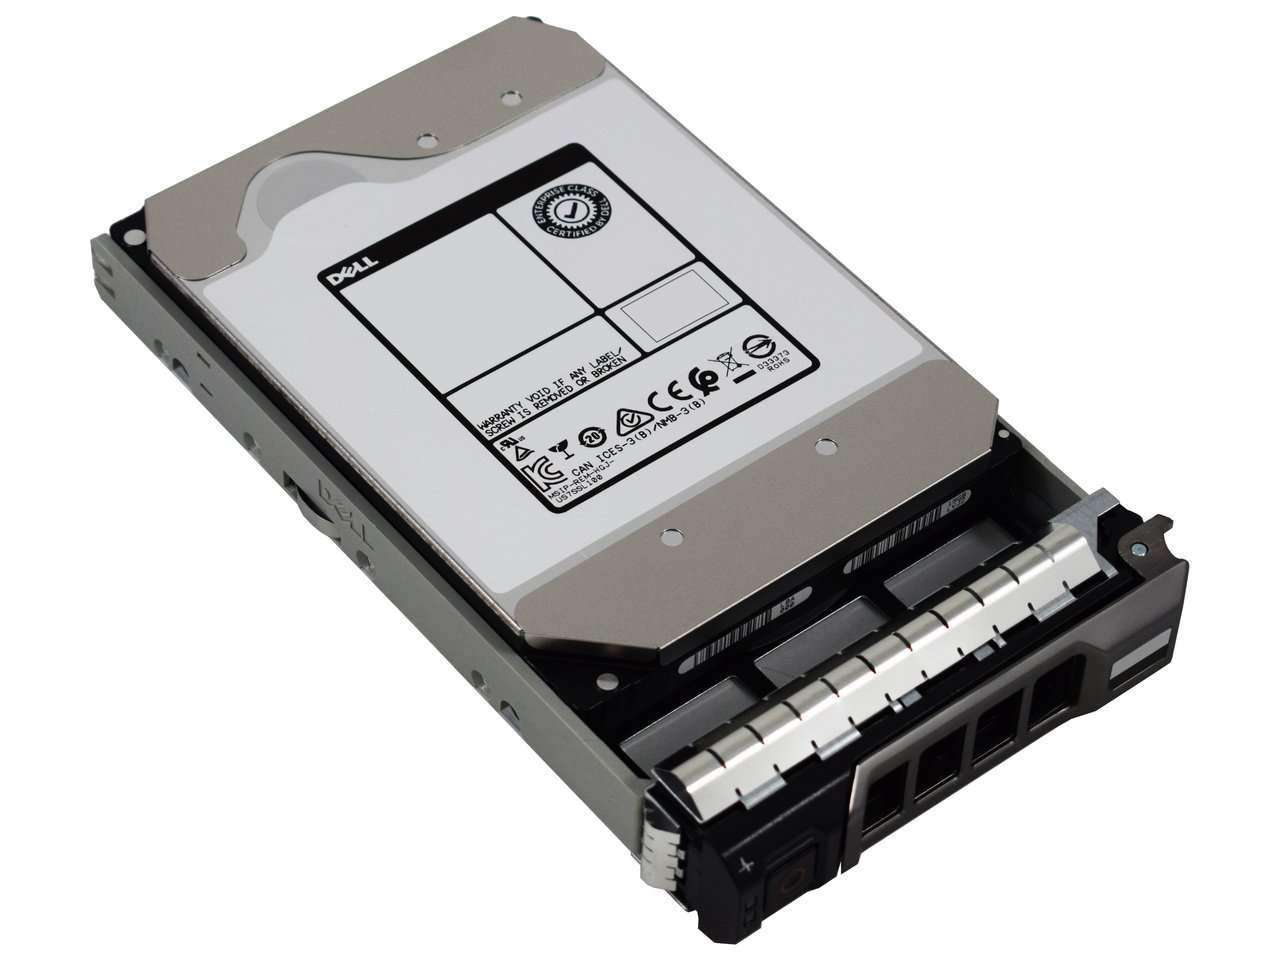 Dell G13 644TP 4TB 7.2K RPM SAS 6Gb/s 512n 3.5" SED-FIPS Manufacturer Recertified HDD